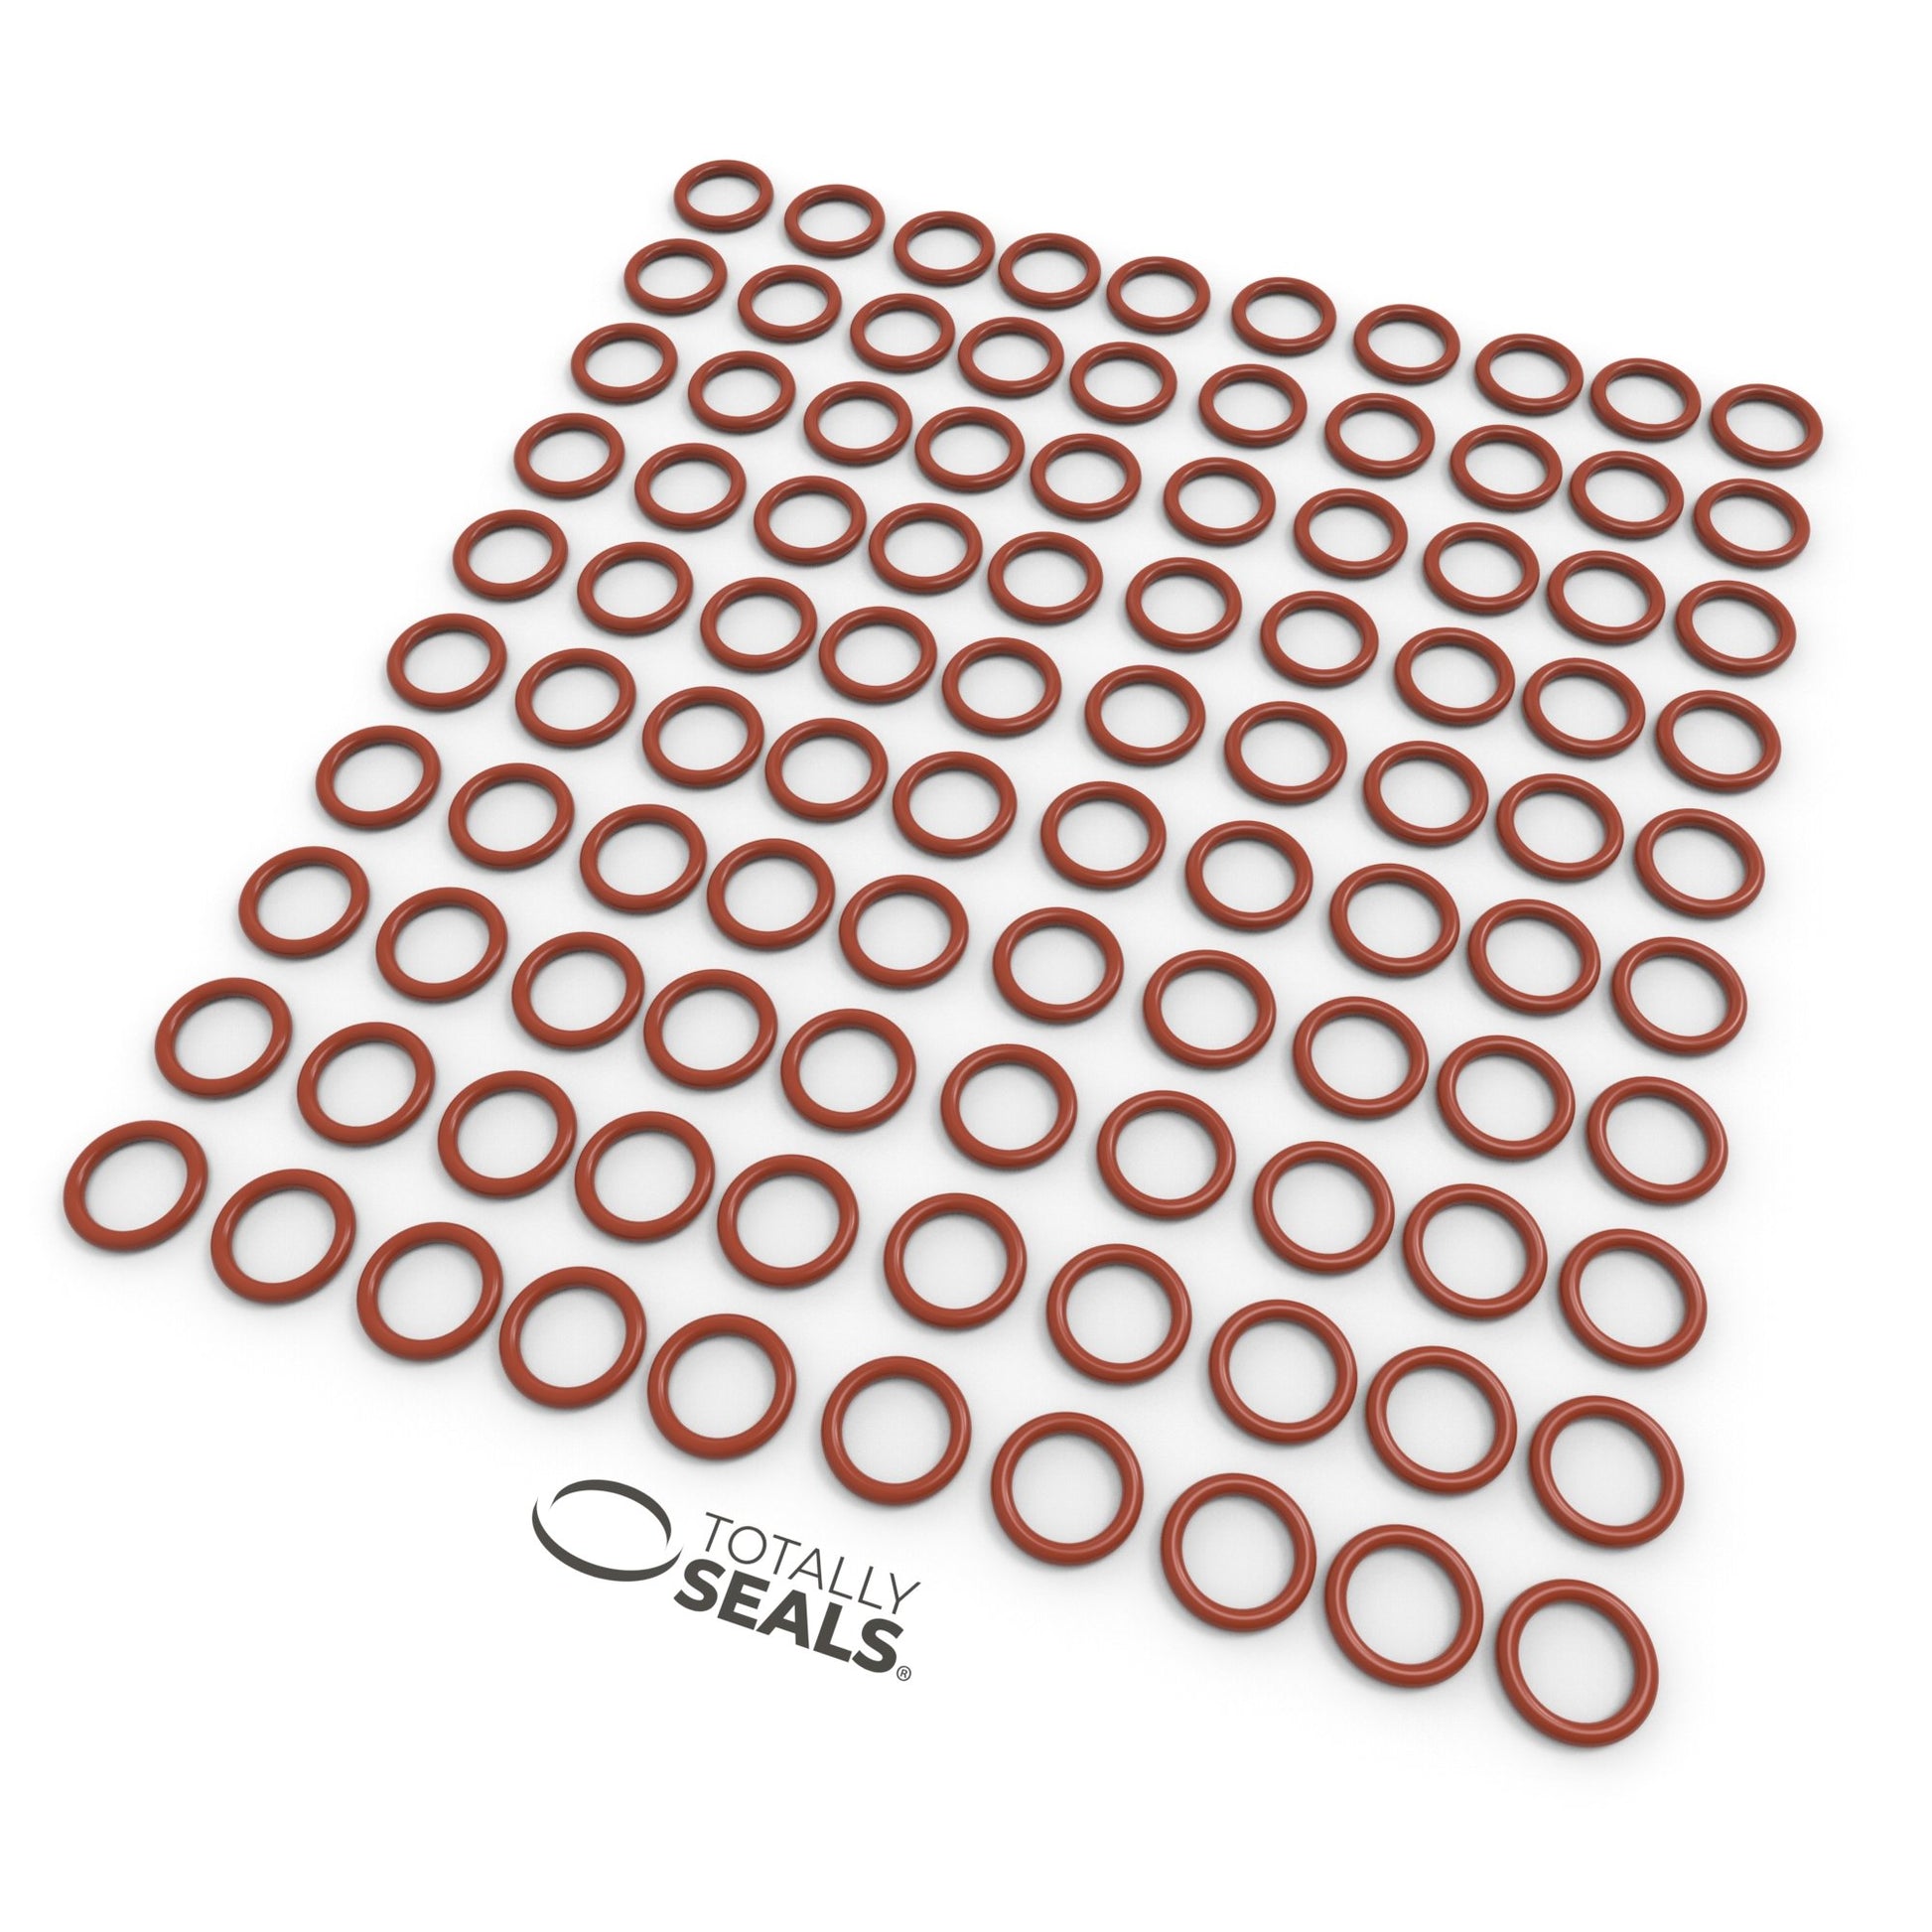 6mm x 2mm (10mm OD) Silicone O-Rings - Totally Seals®